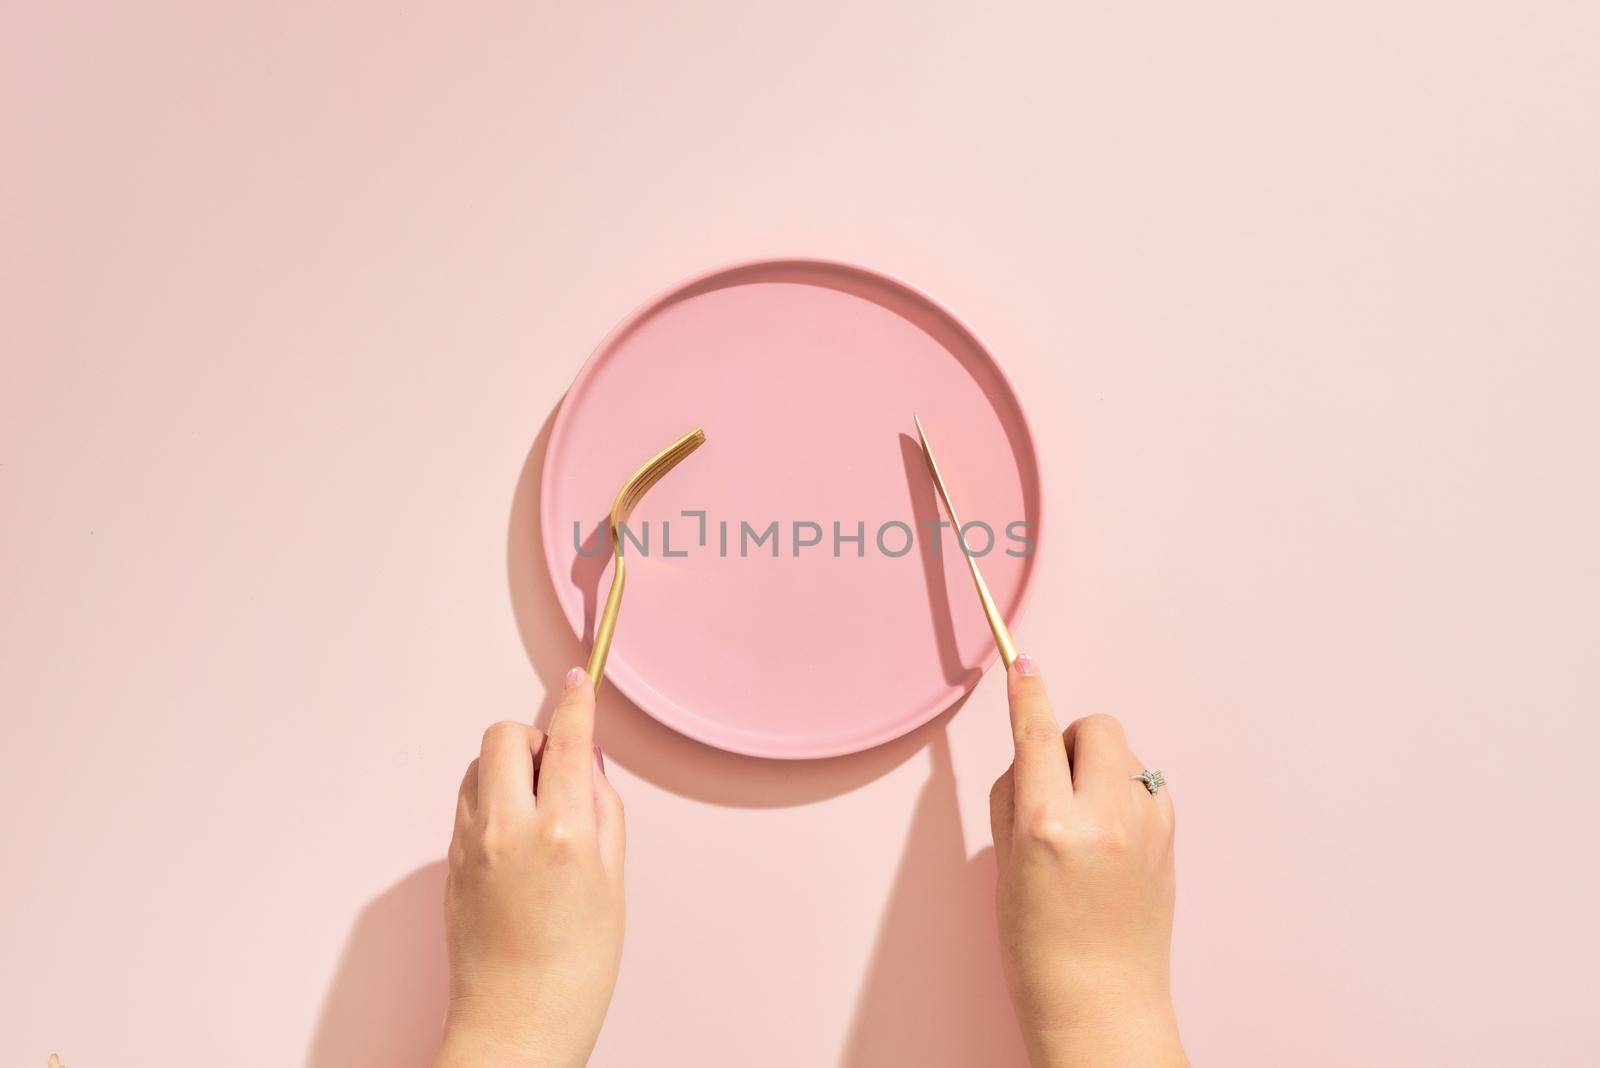 Hands hold a fork and knife over plate on pink background